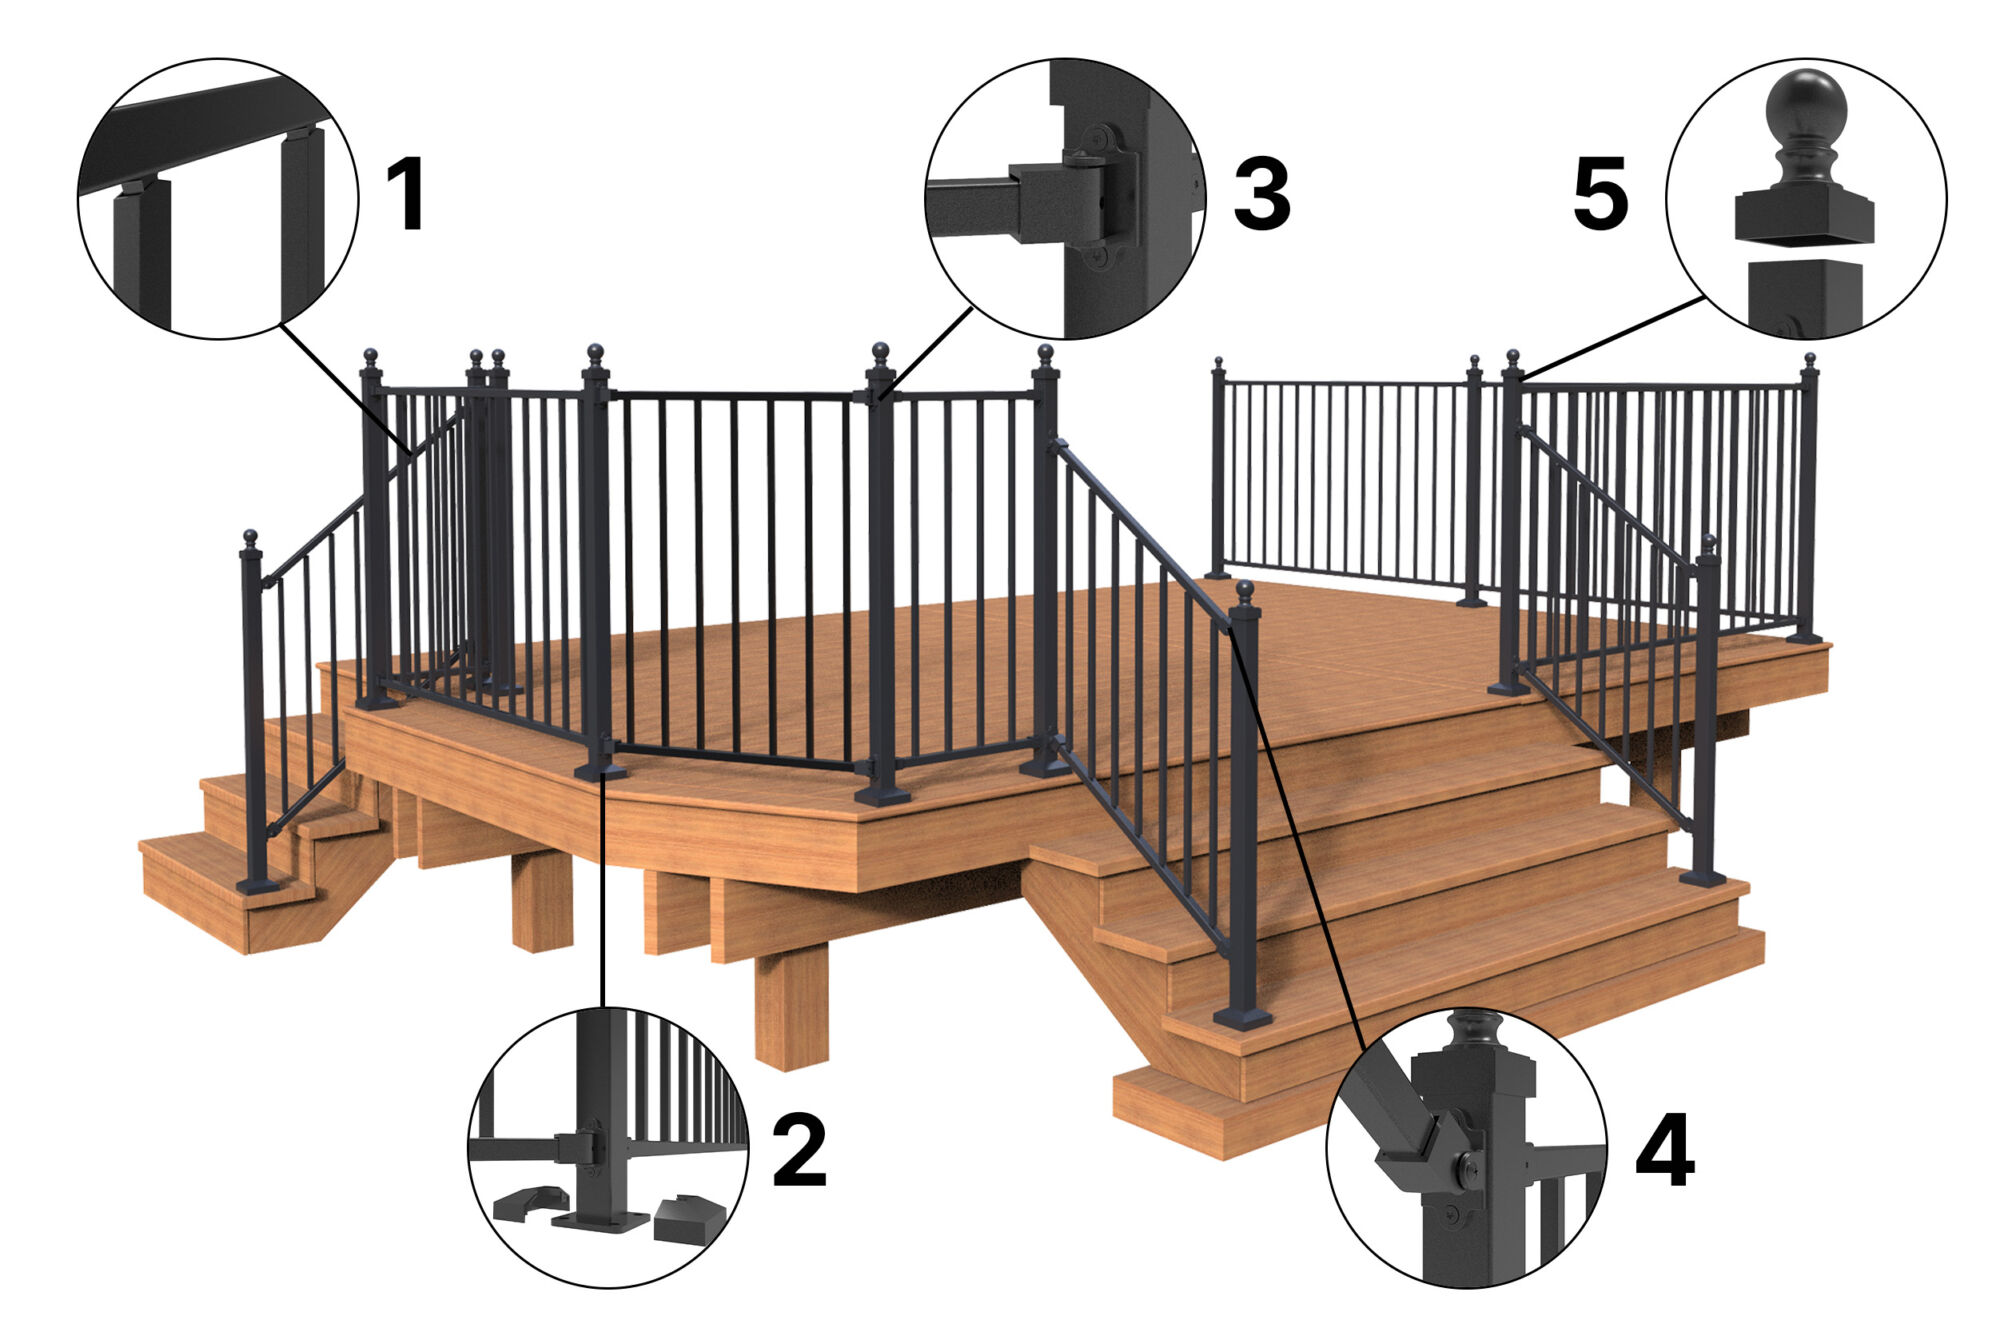 Fortitude metal railings system components